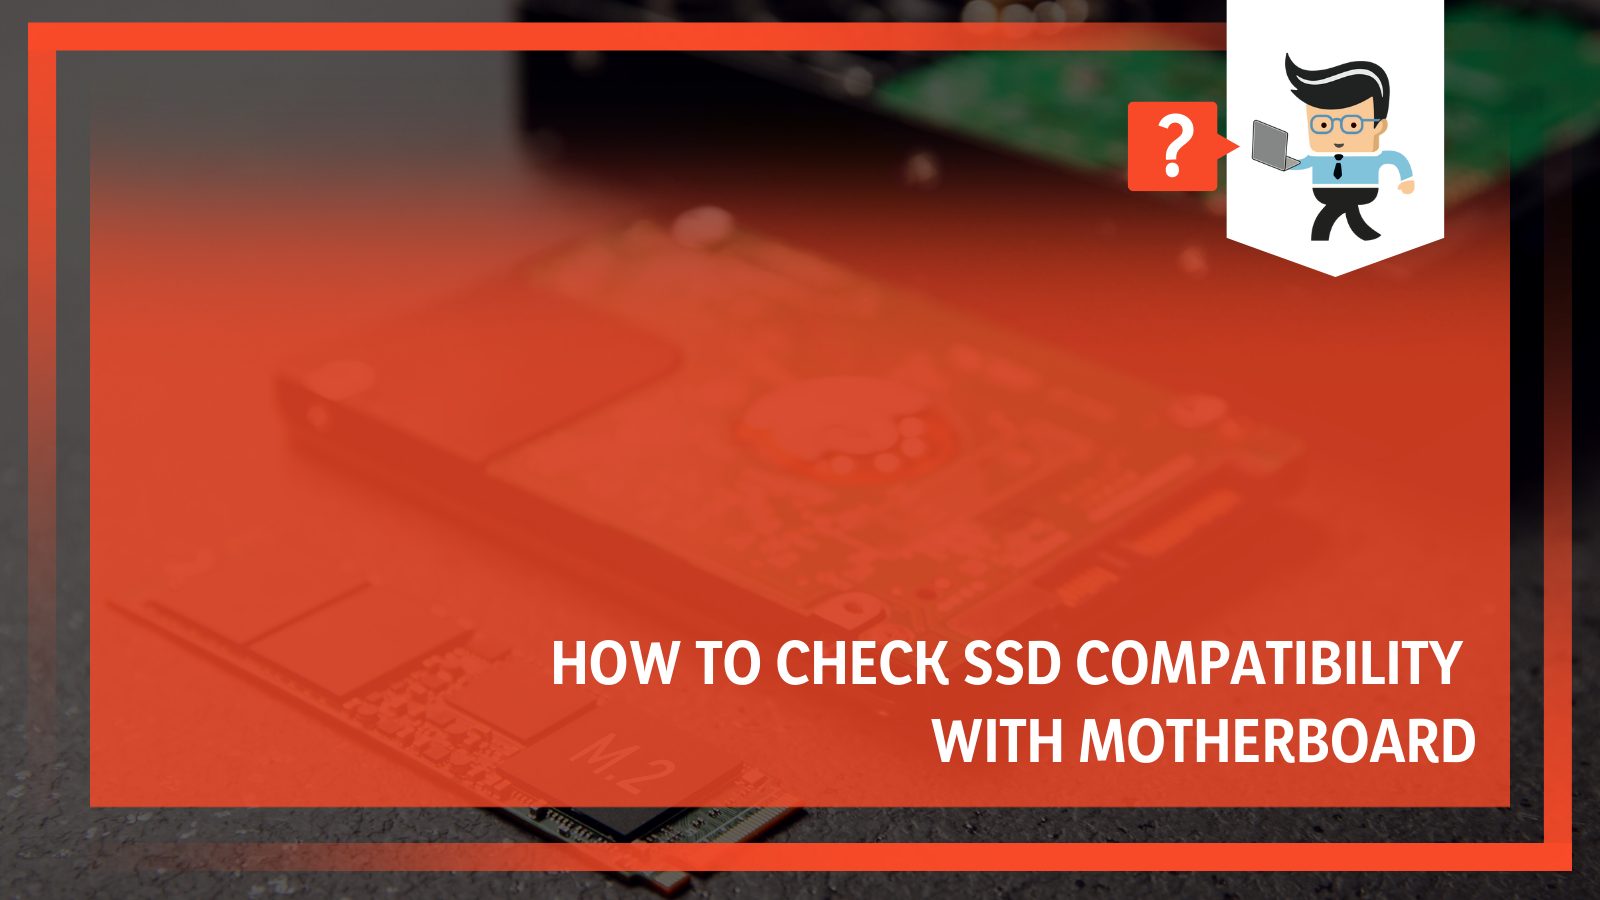 How to Check SSD Compatibility With Motherboard